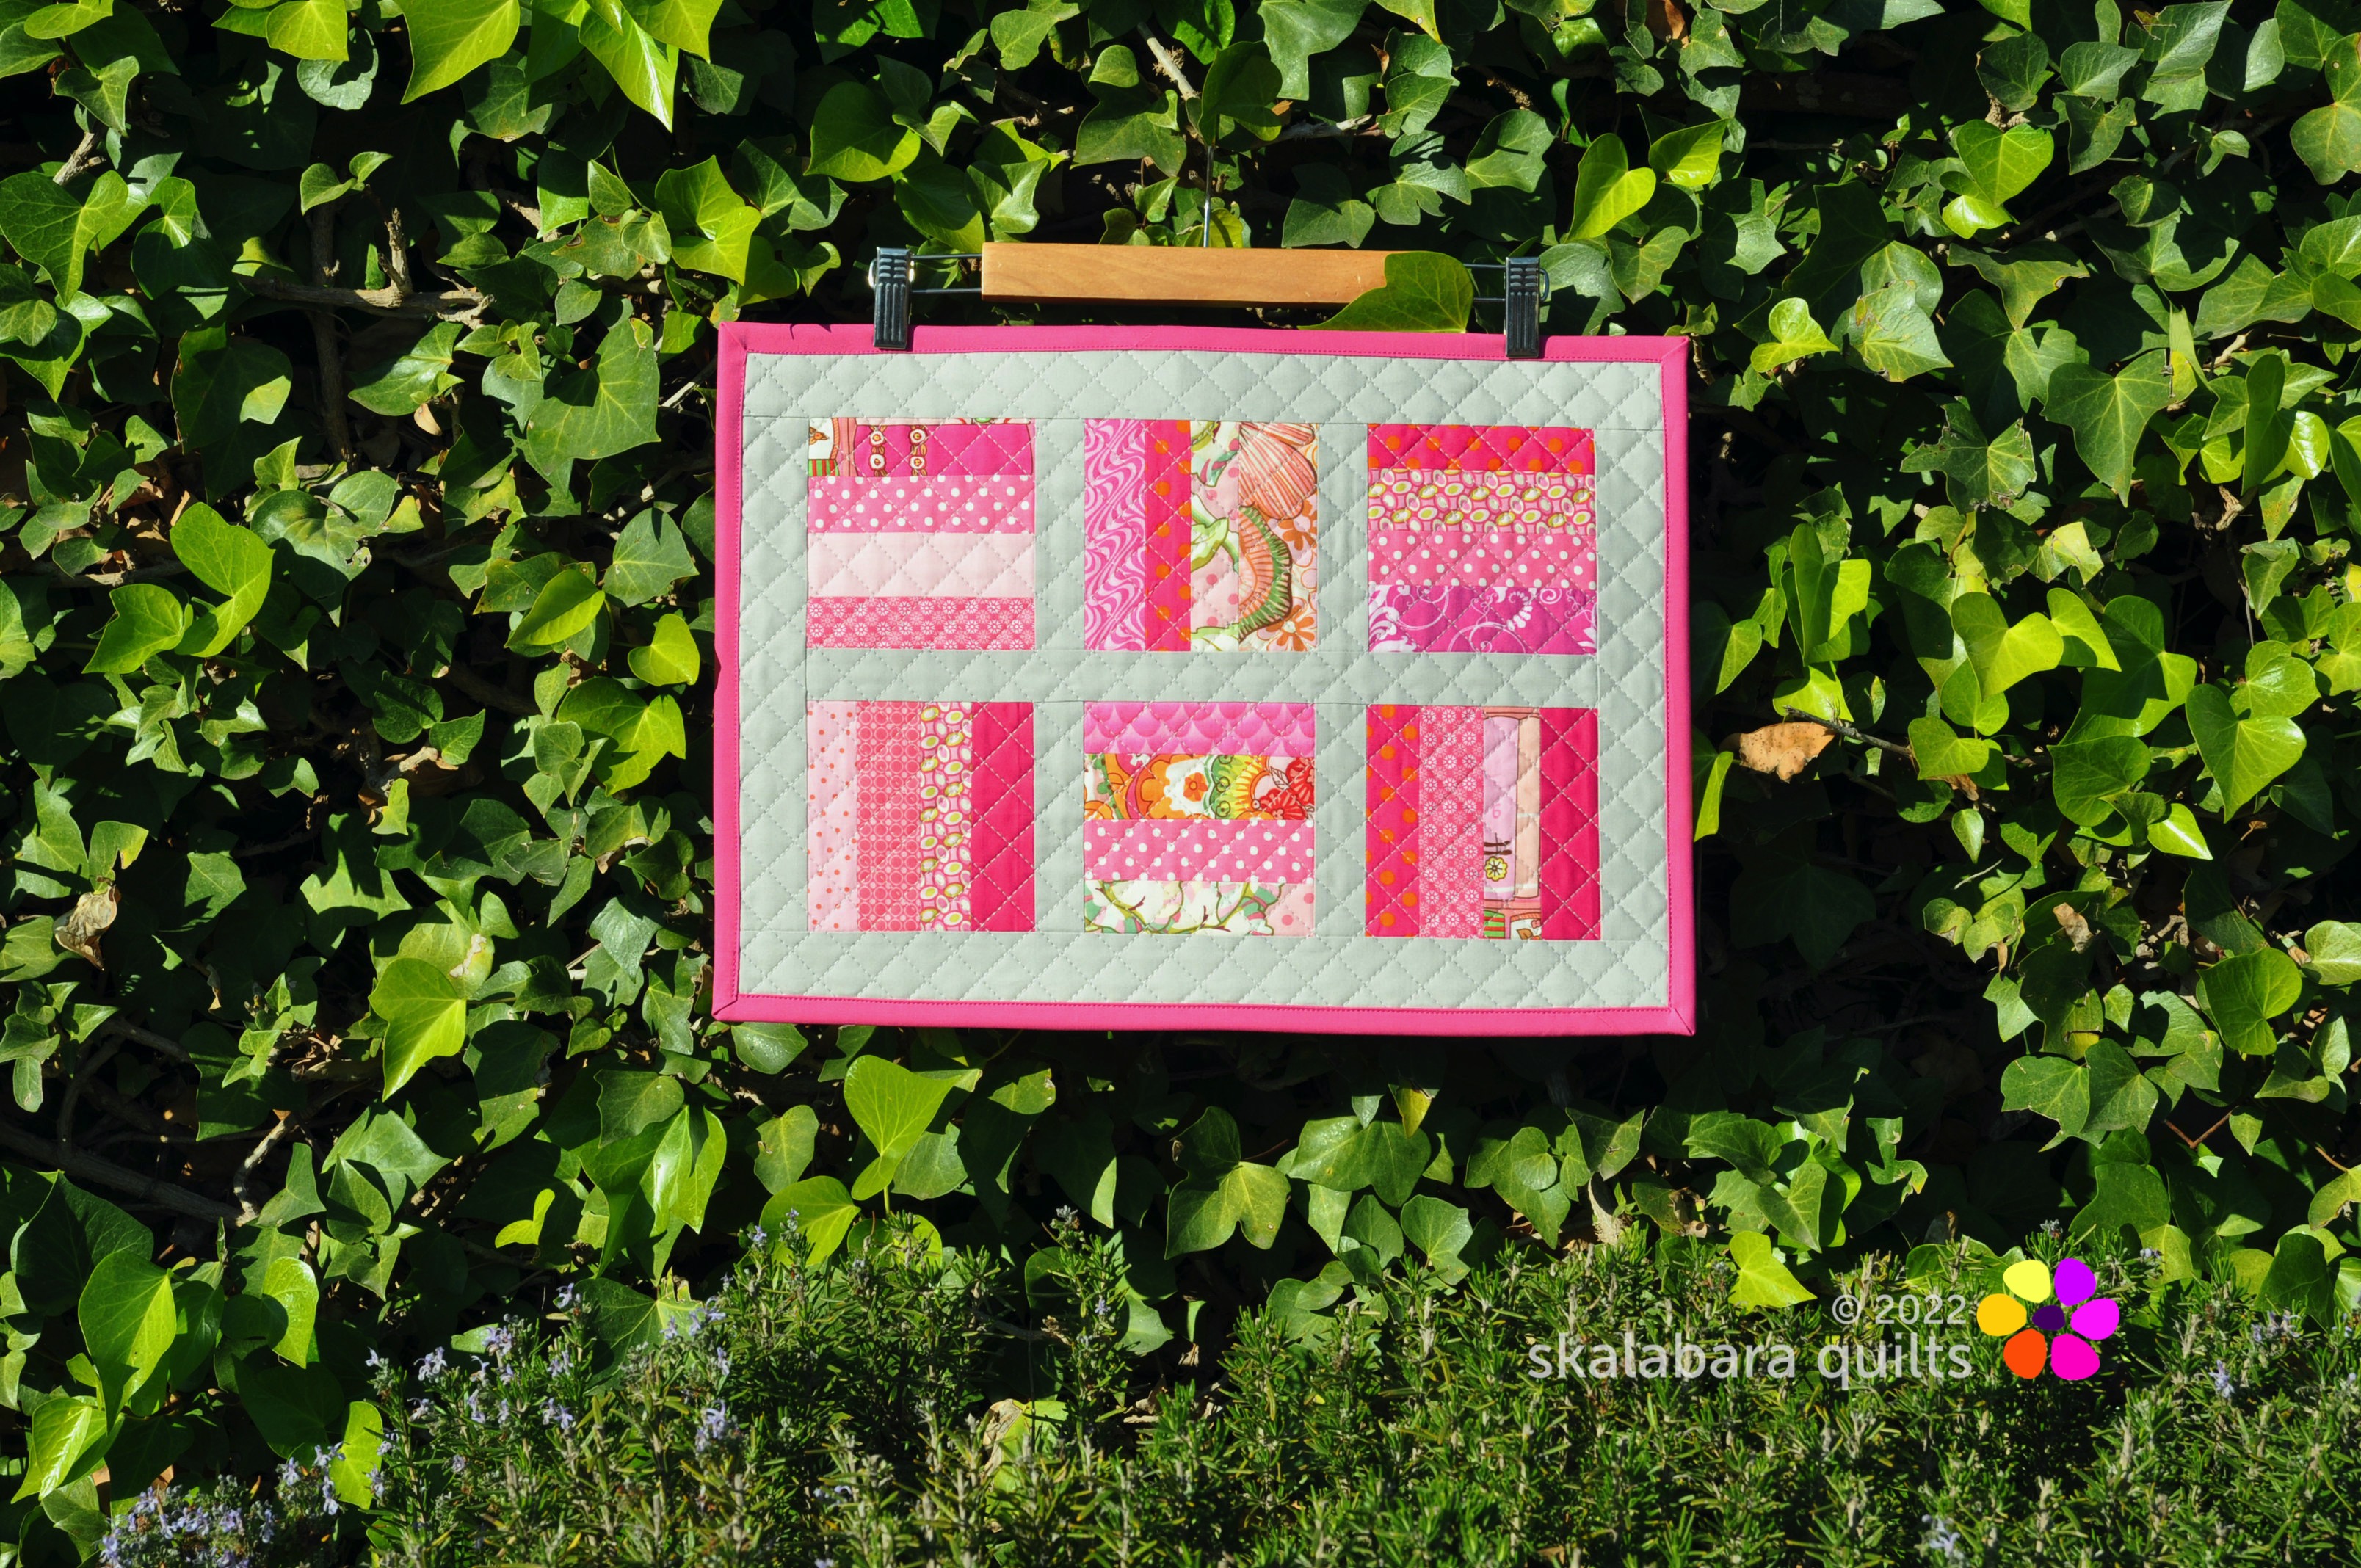 set of quilted placemats in pink - skalabara quilts